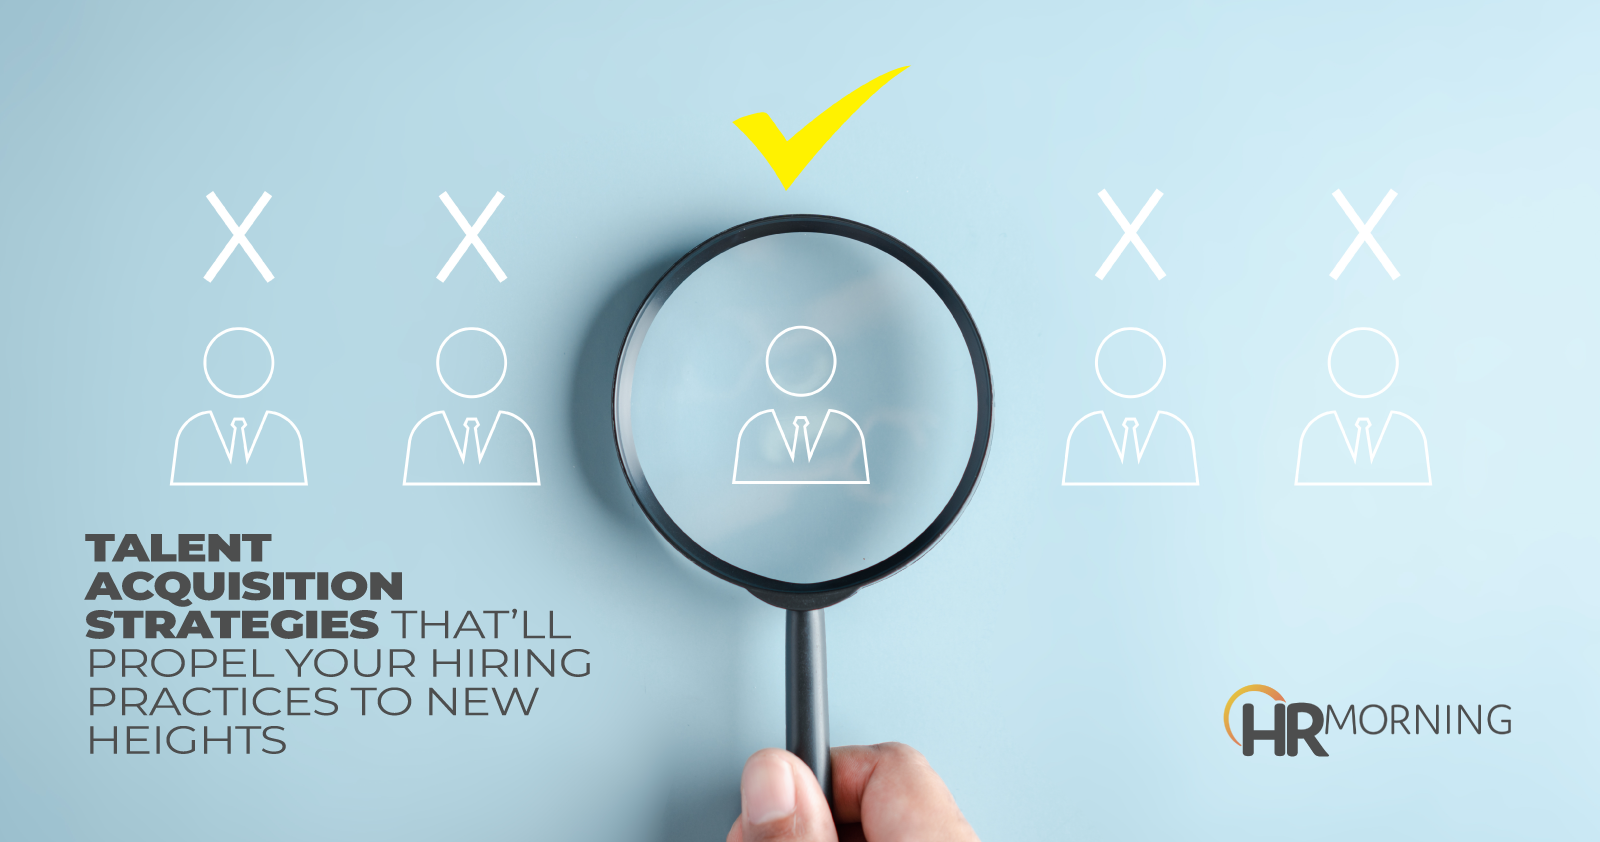 Talent acquisition strategies that’ll propel your hiring practices to new heights